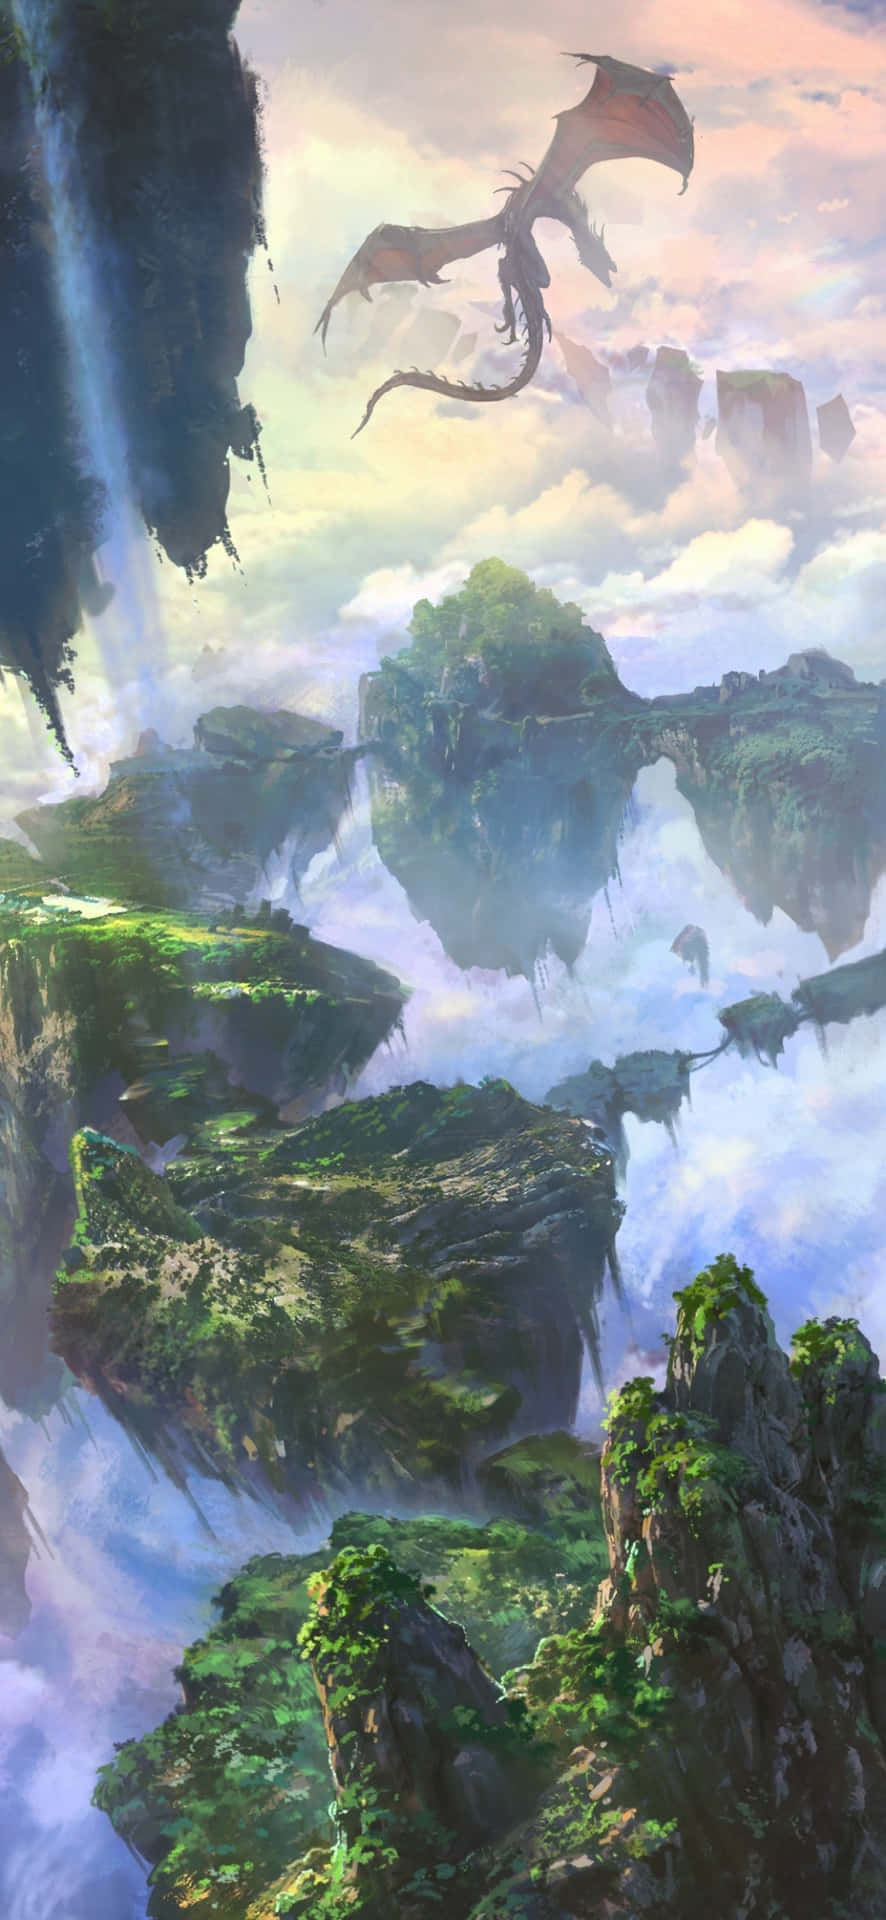 Experience a world beyond reality with the Fantasy Phone Wallpaper